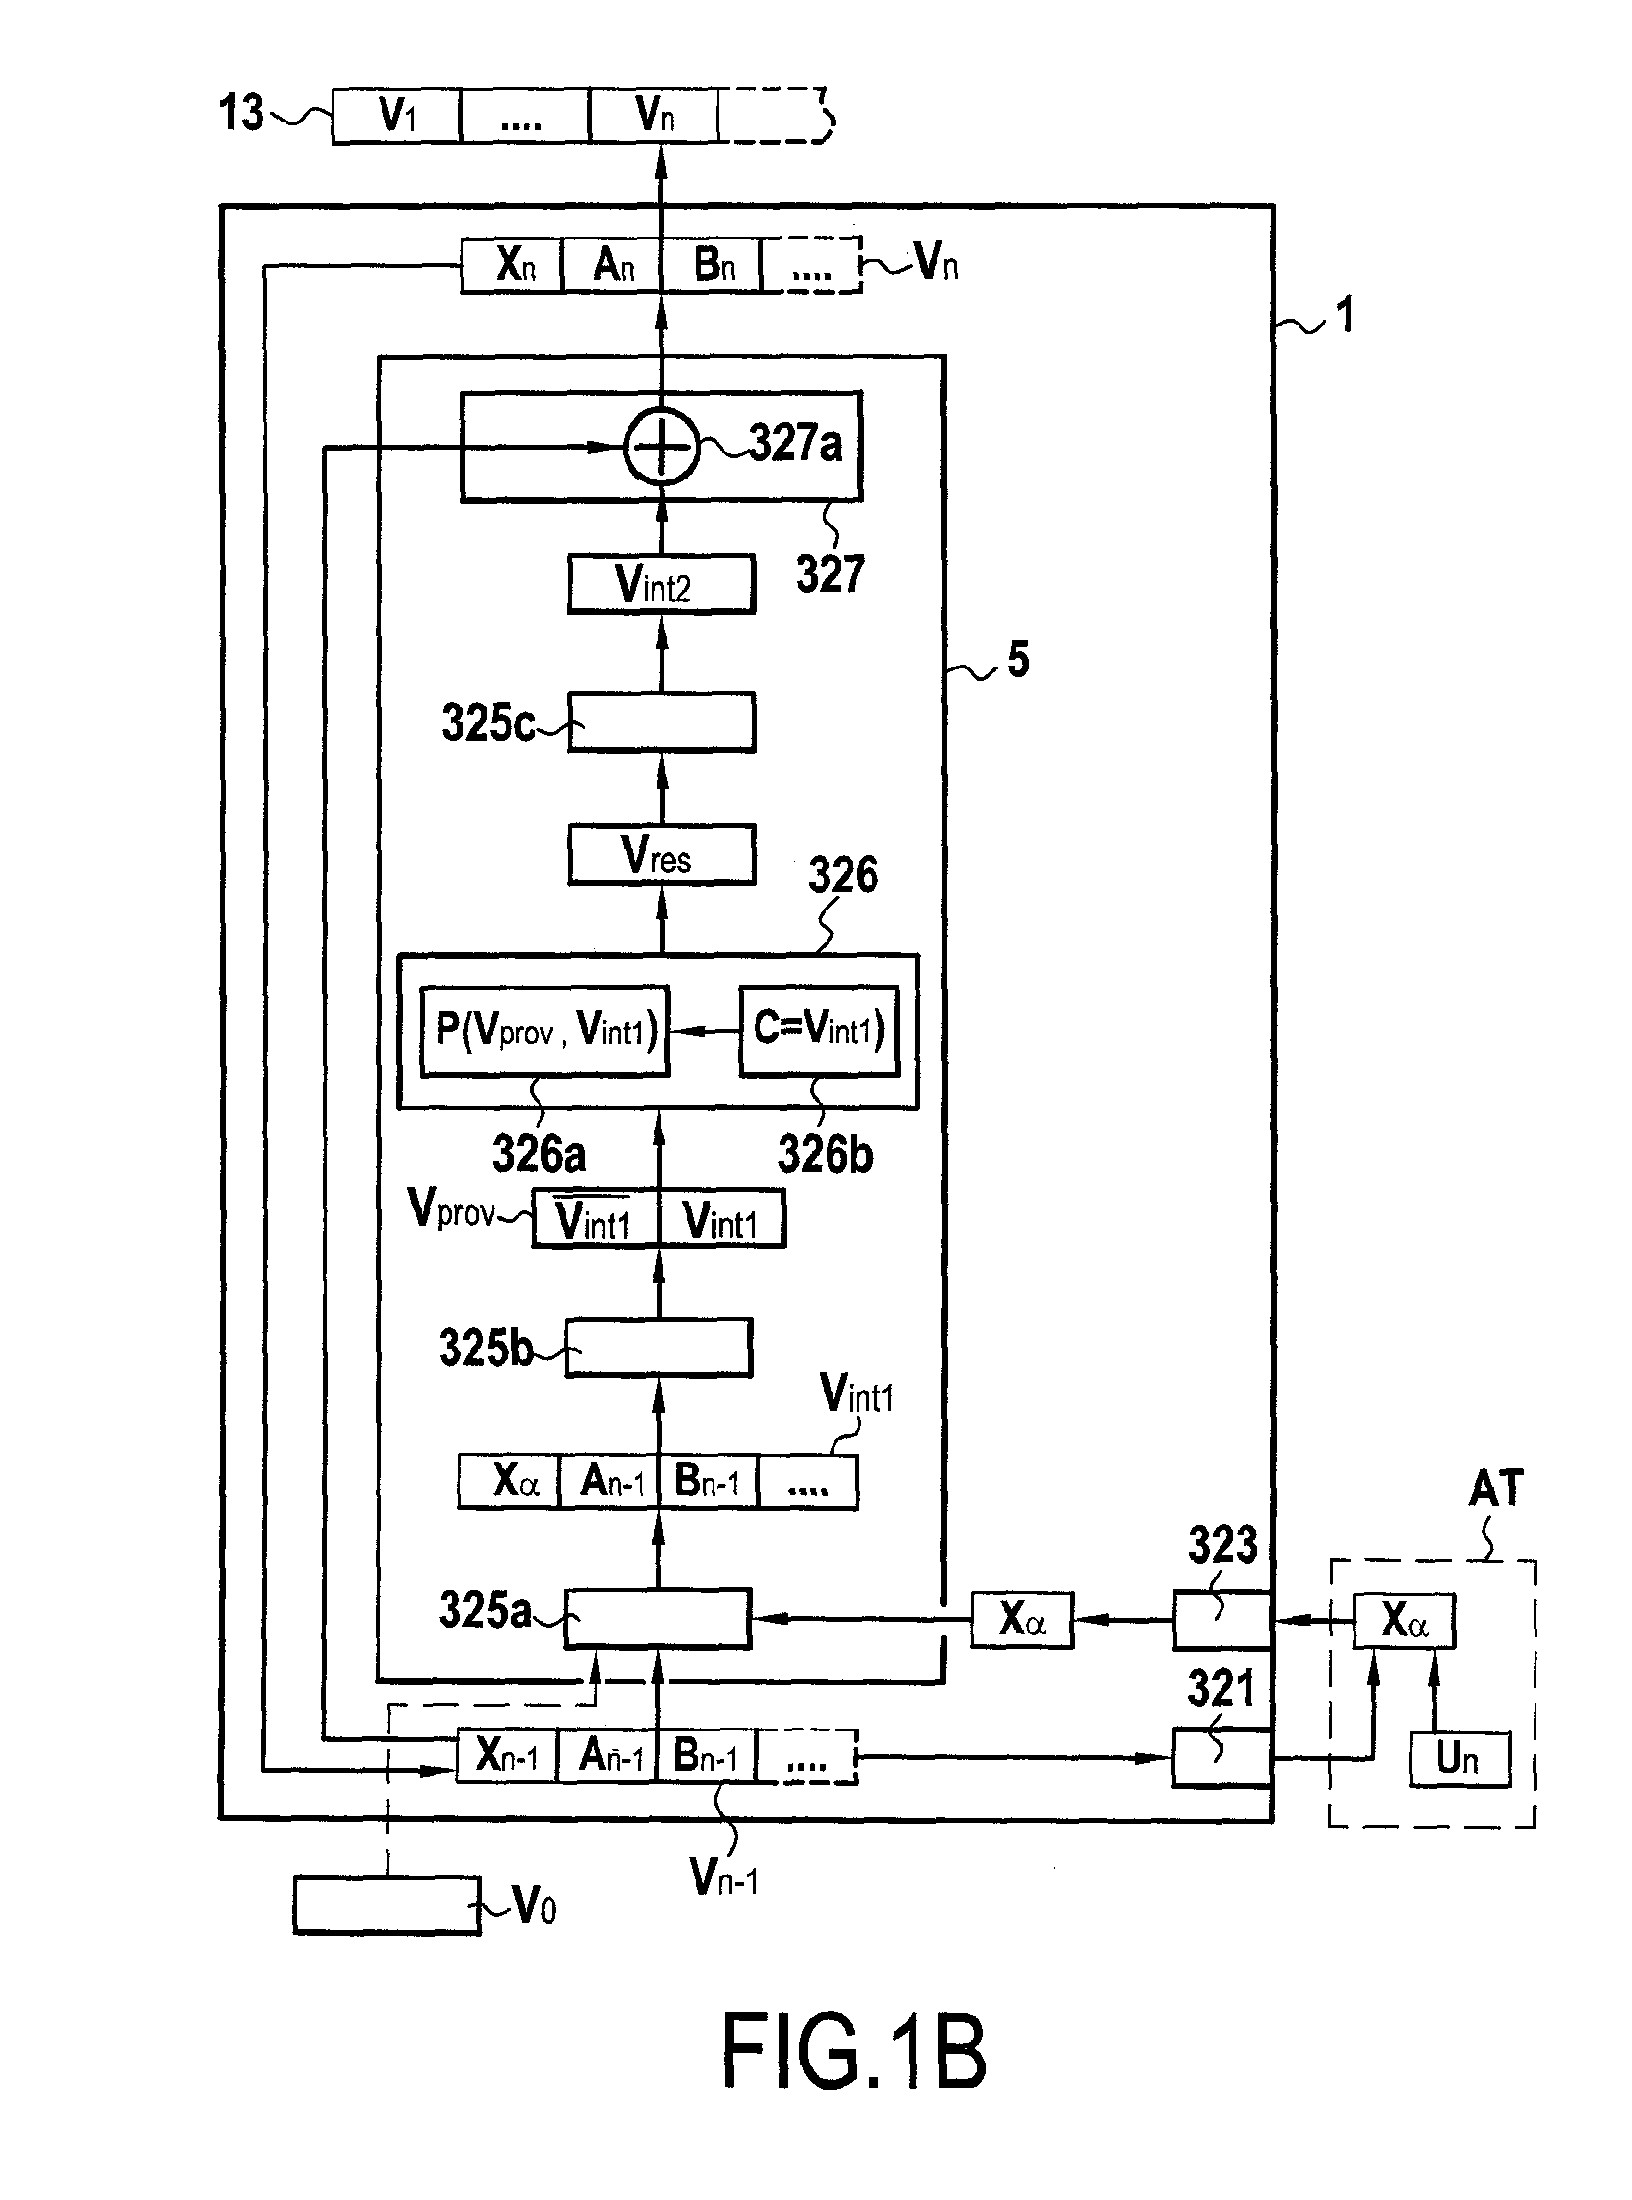 Cryptographic methods and devices for pseudo-random generation, encrypting data, and cryptographically hashing a message